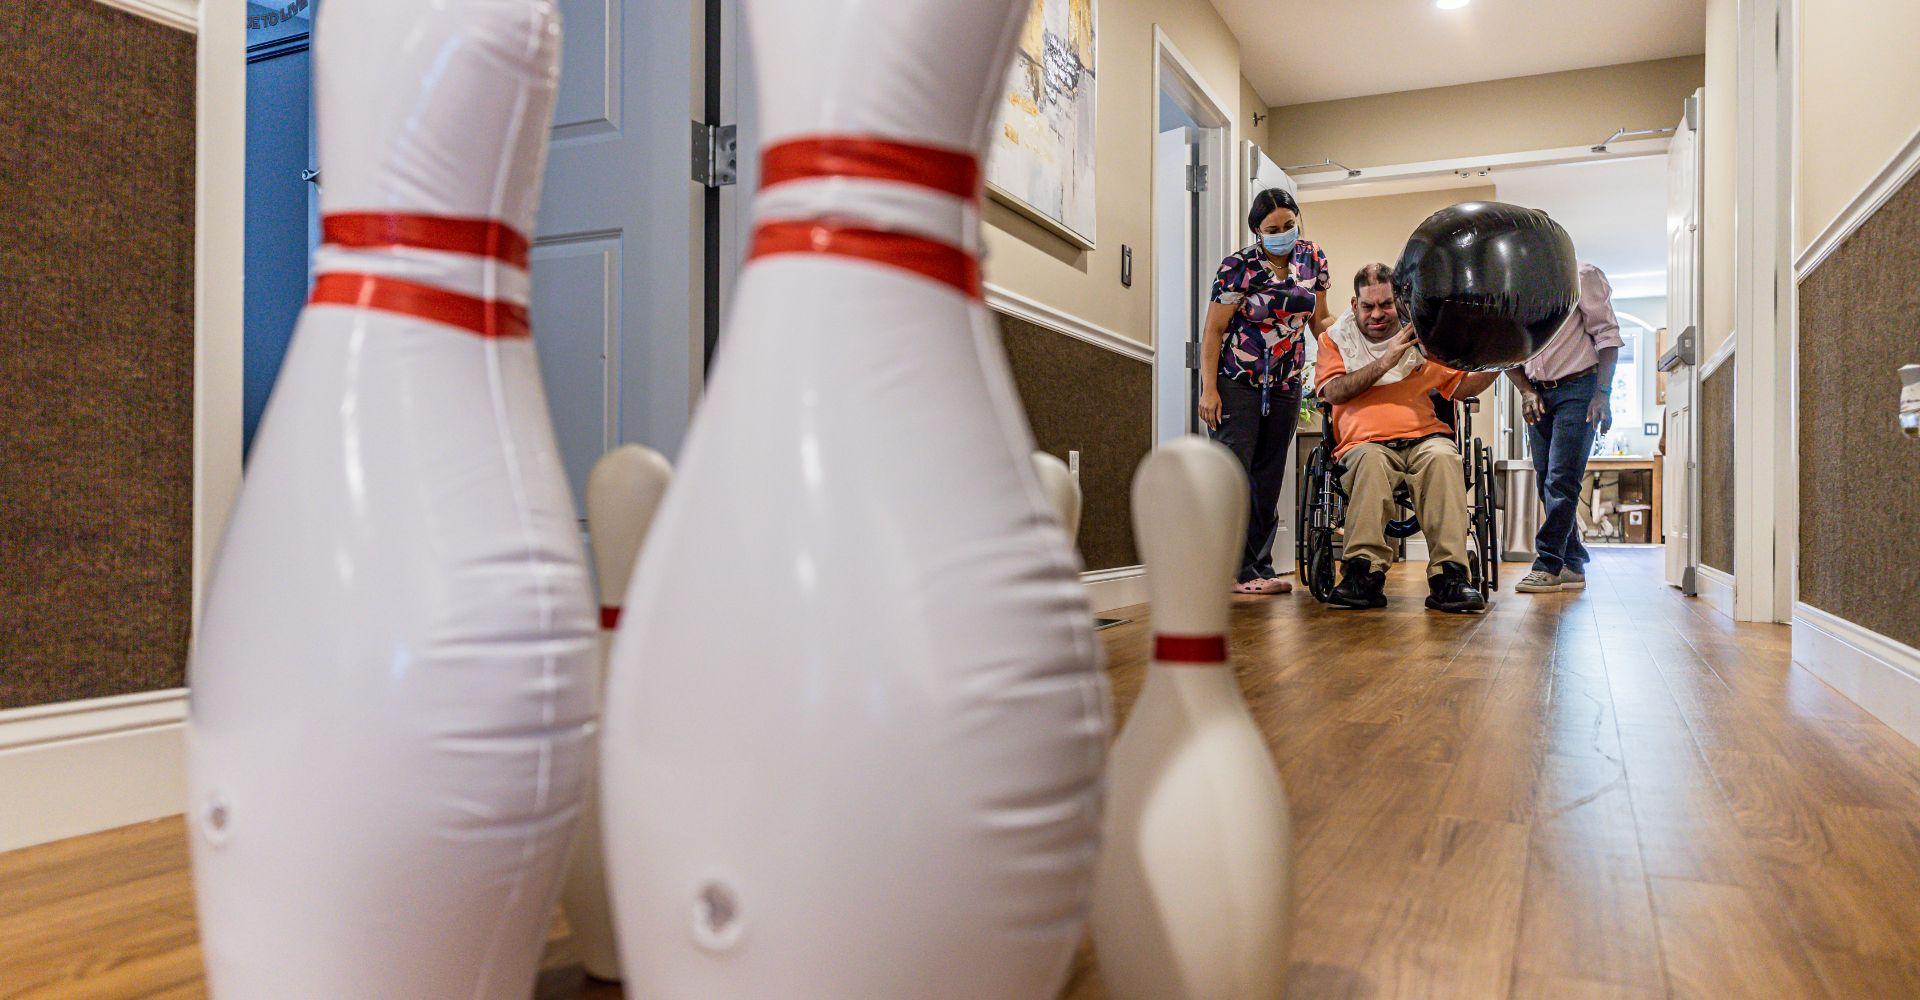 Image of man in wheel chair bowling